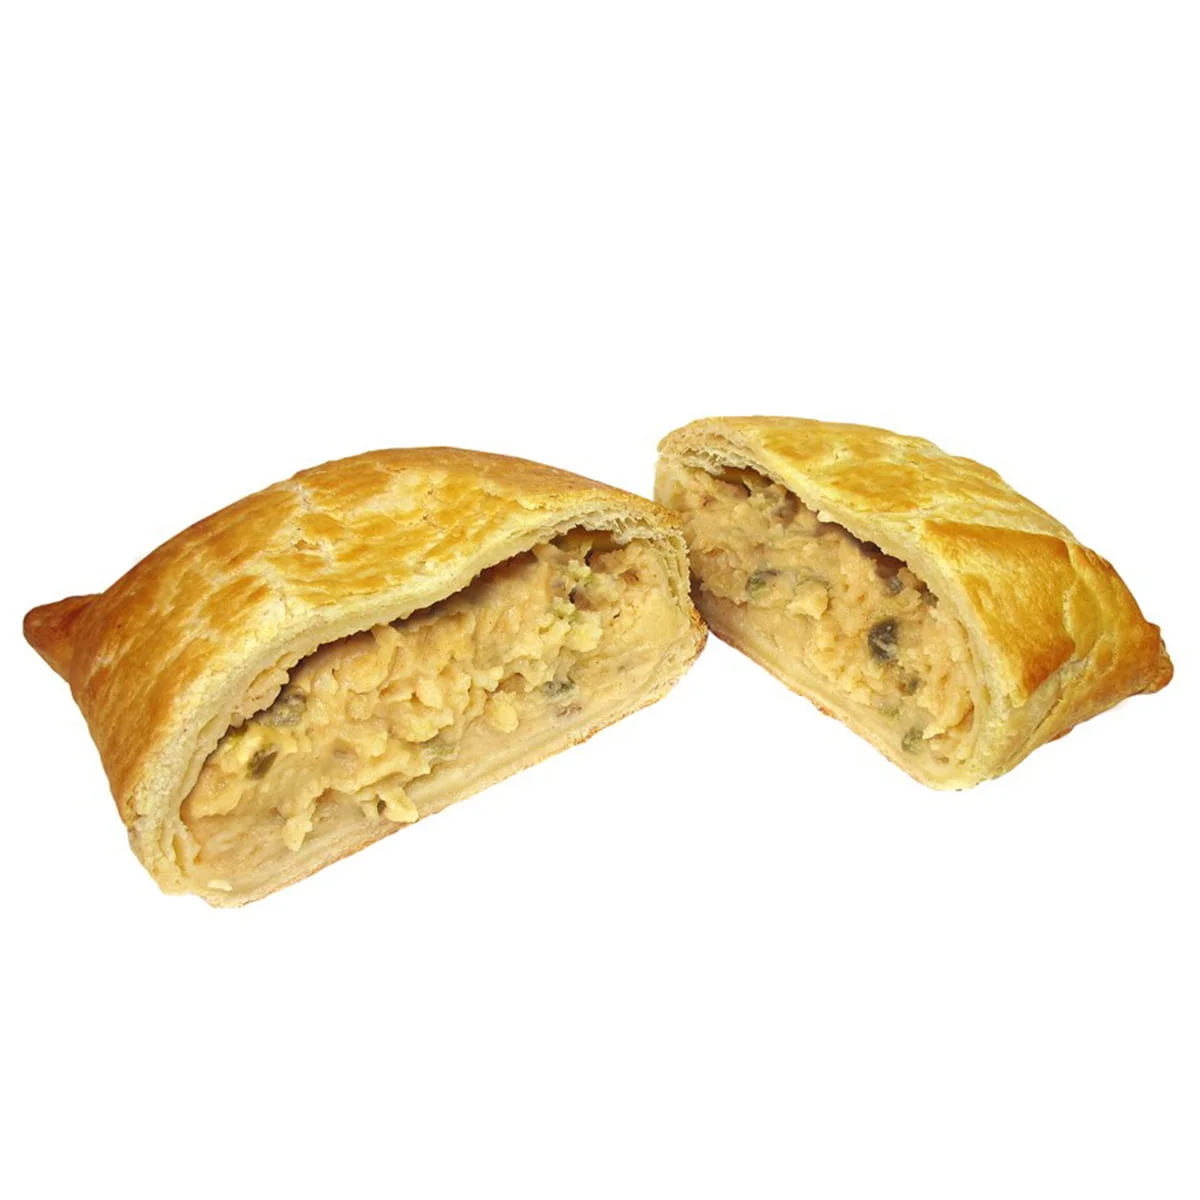 11530 Cheese and Jalapeno Pasty